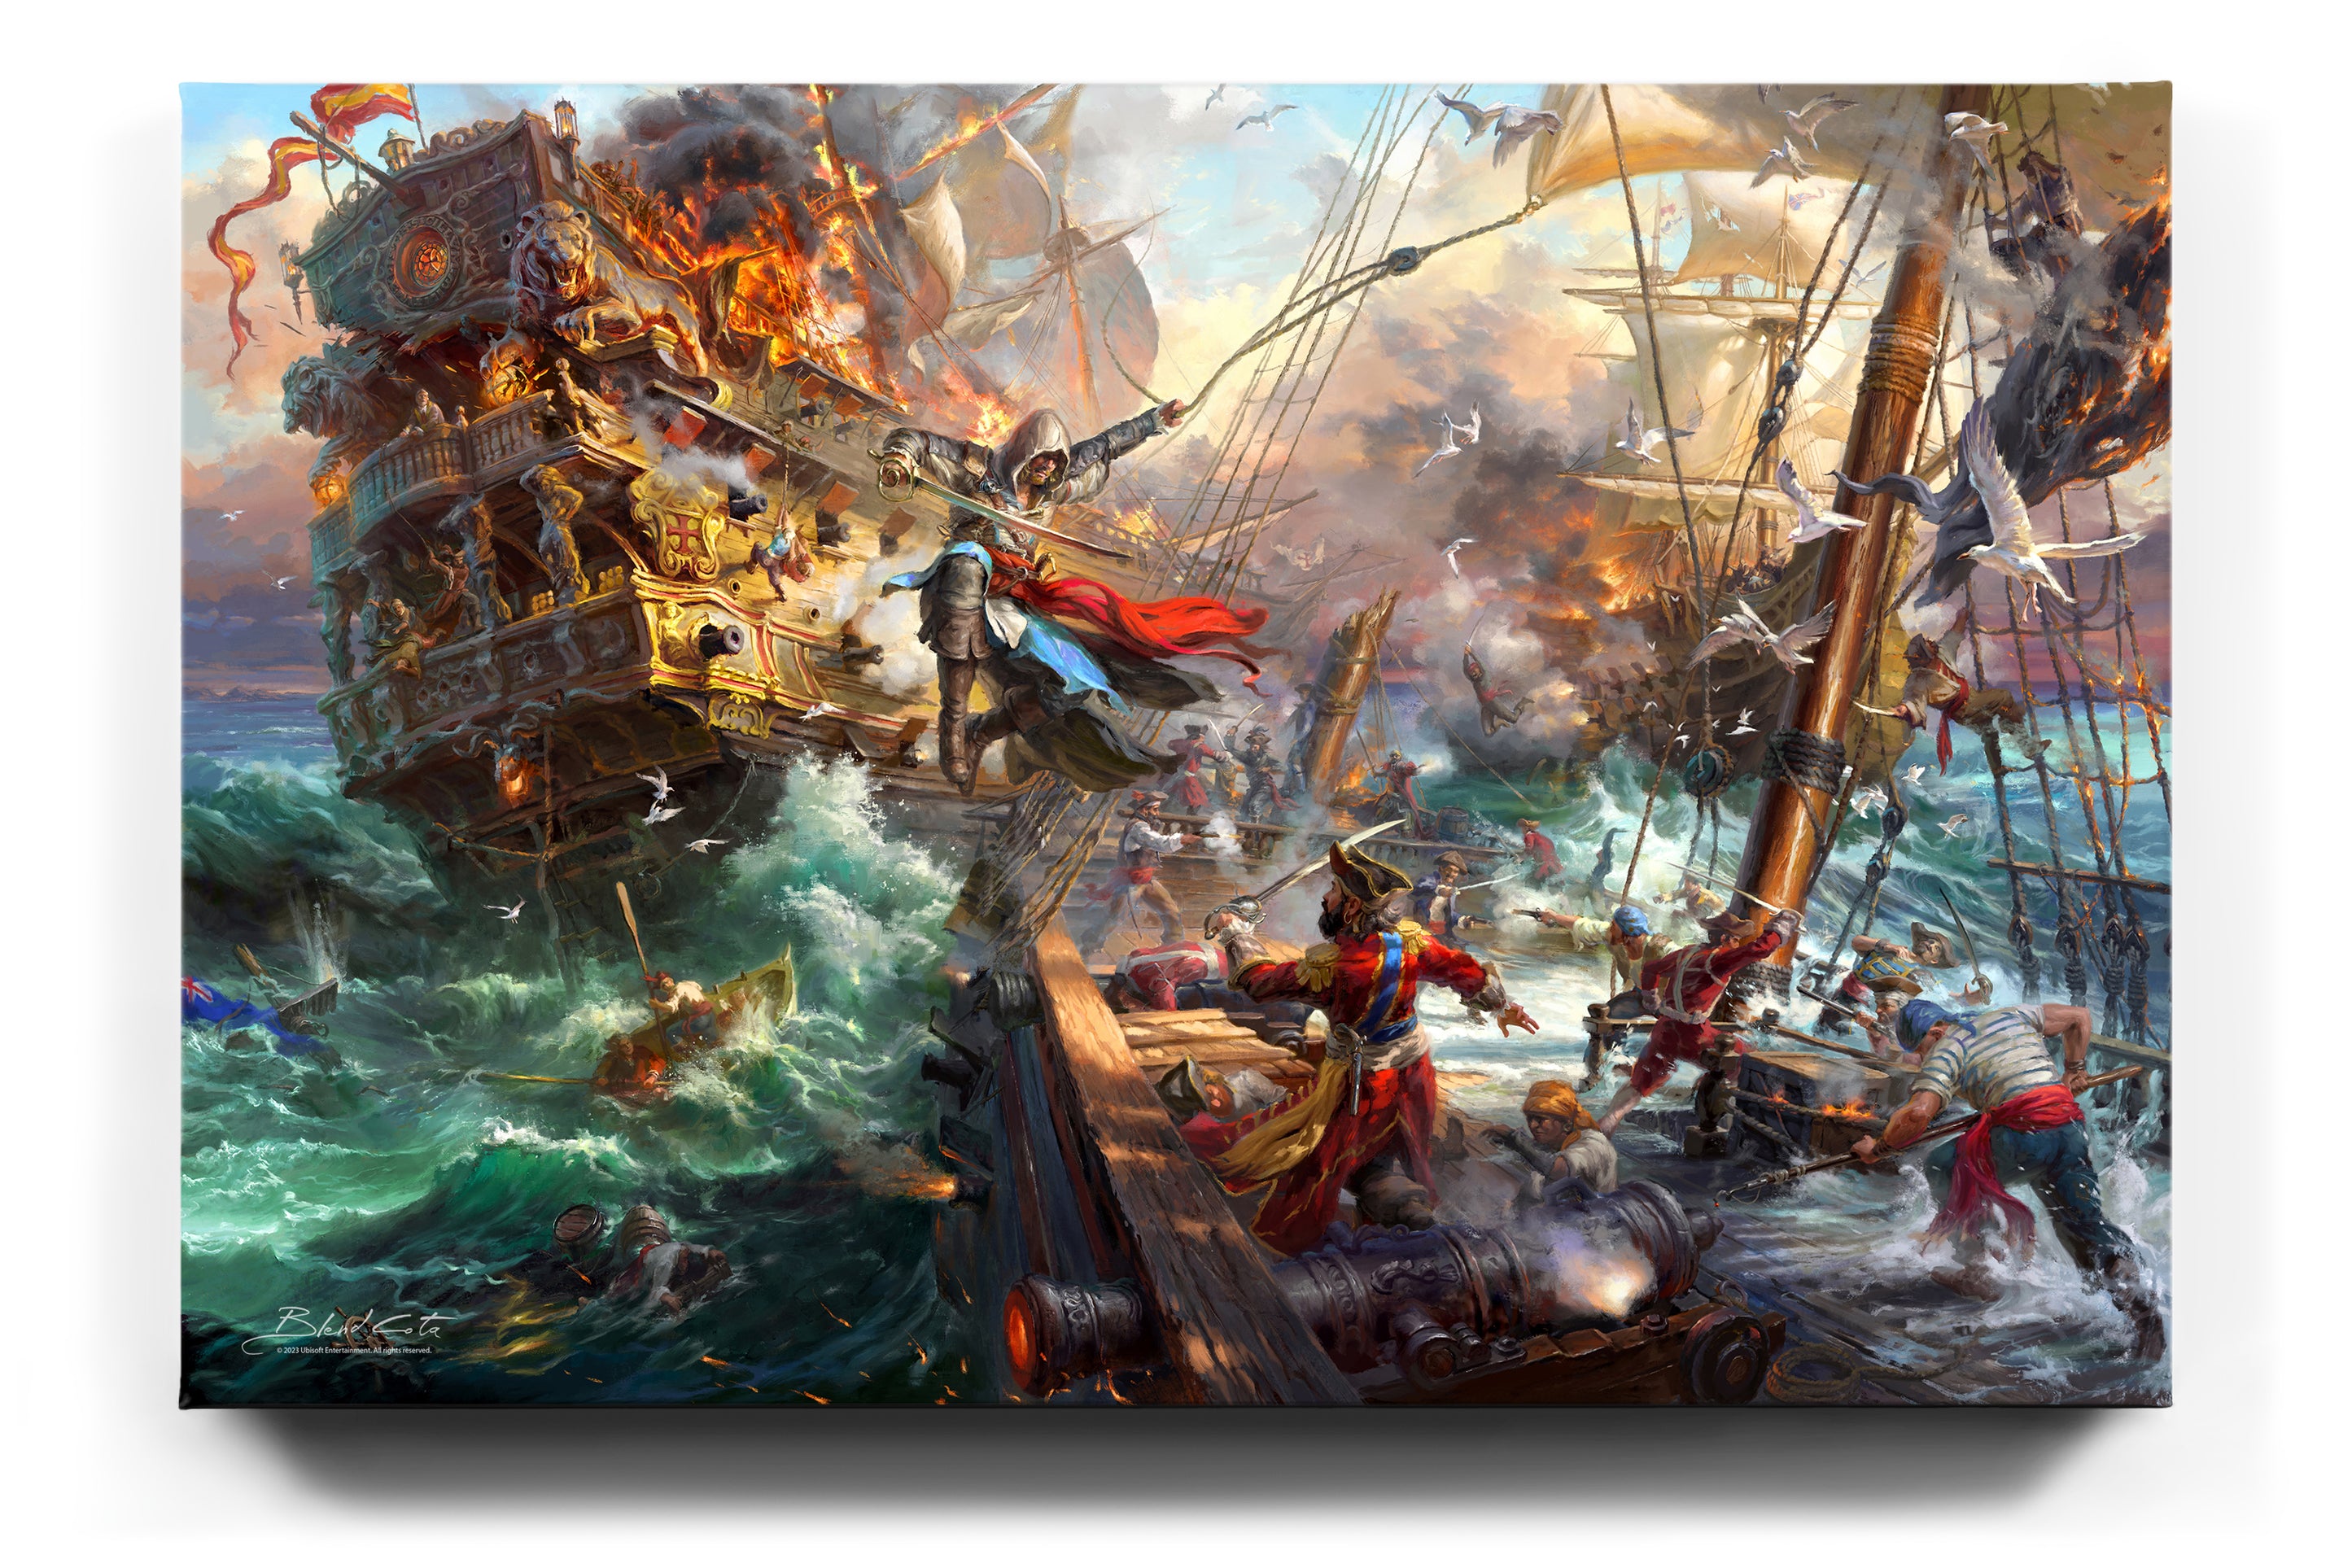 
                  
                    A naval battle at sea from Ubisoft's Assassin's Creed IV Black Flag with Edward Kenway and Bartholomew Roberts fighting on deck in this painting as a gallery wrapped canvas.
                  
                